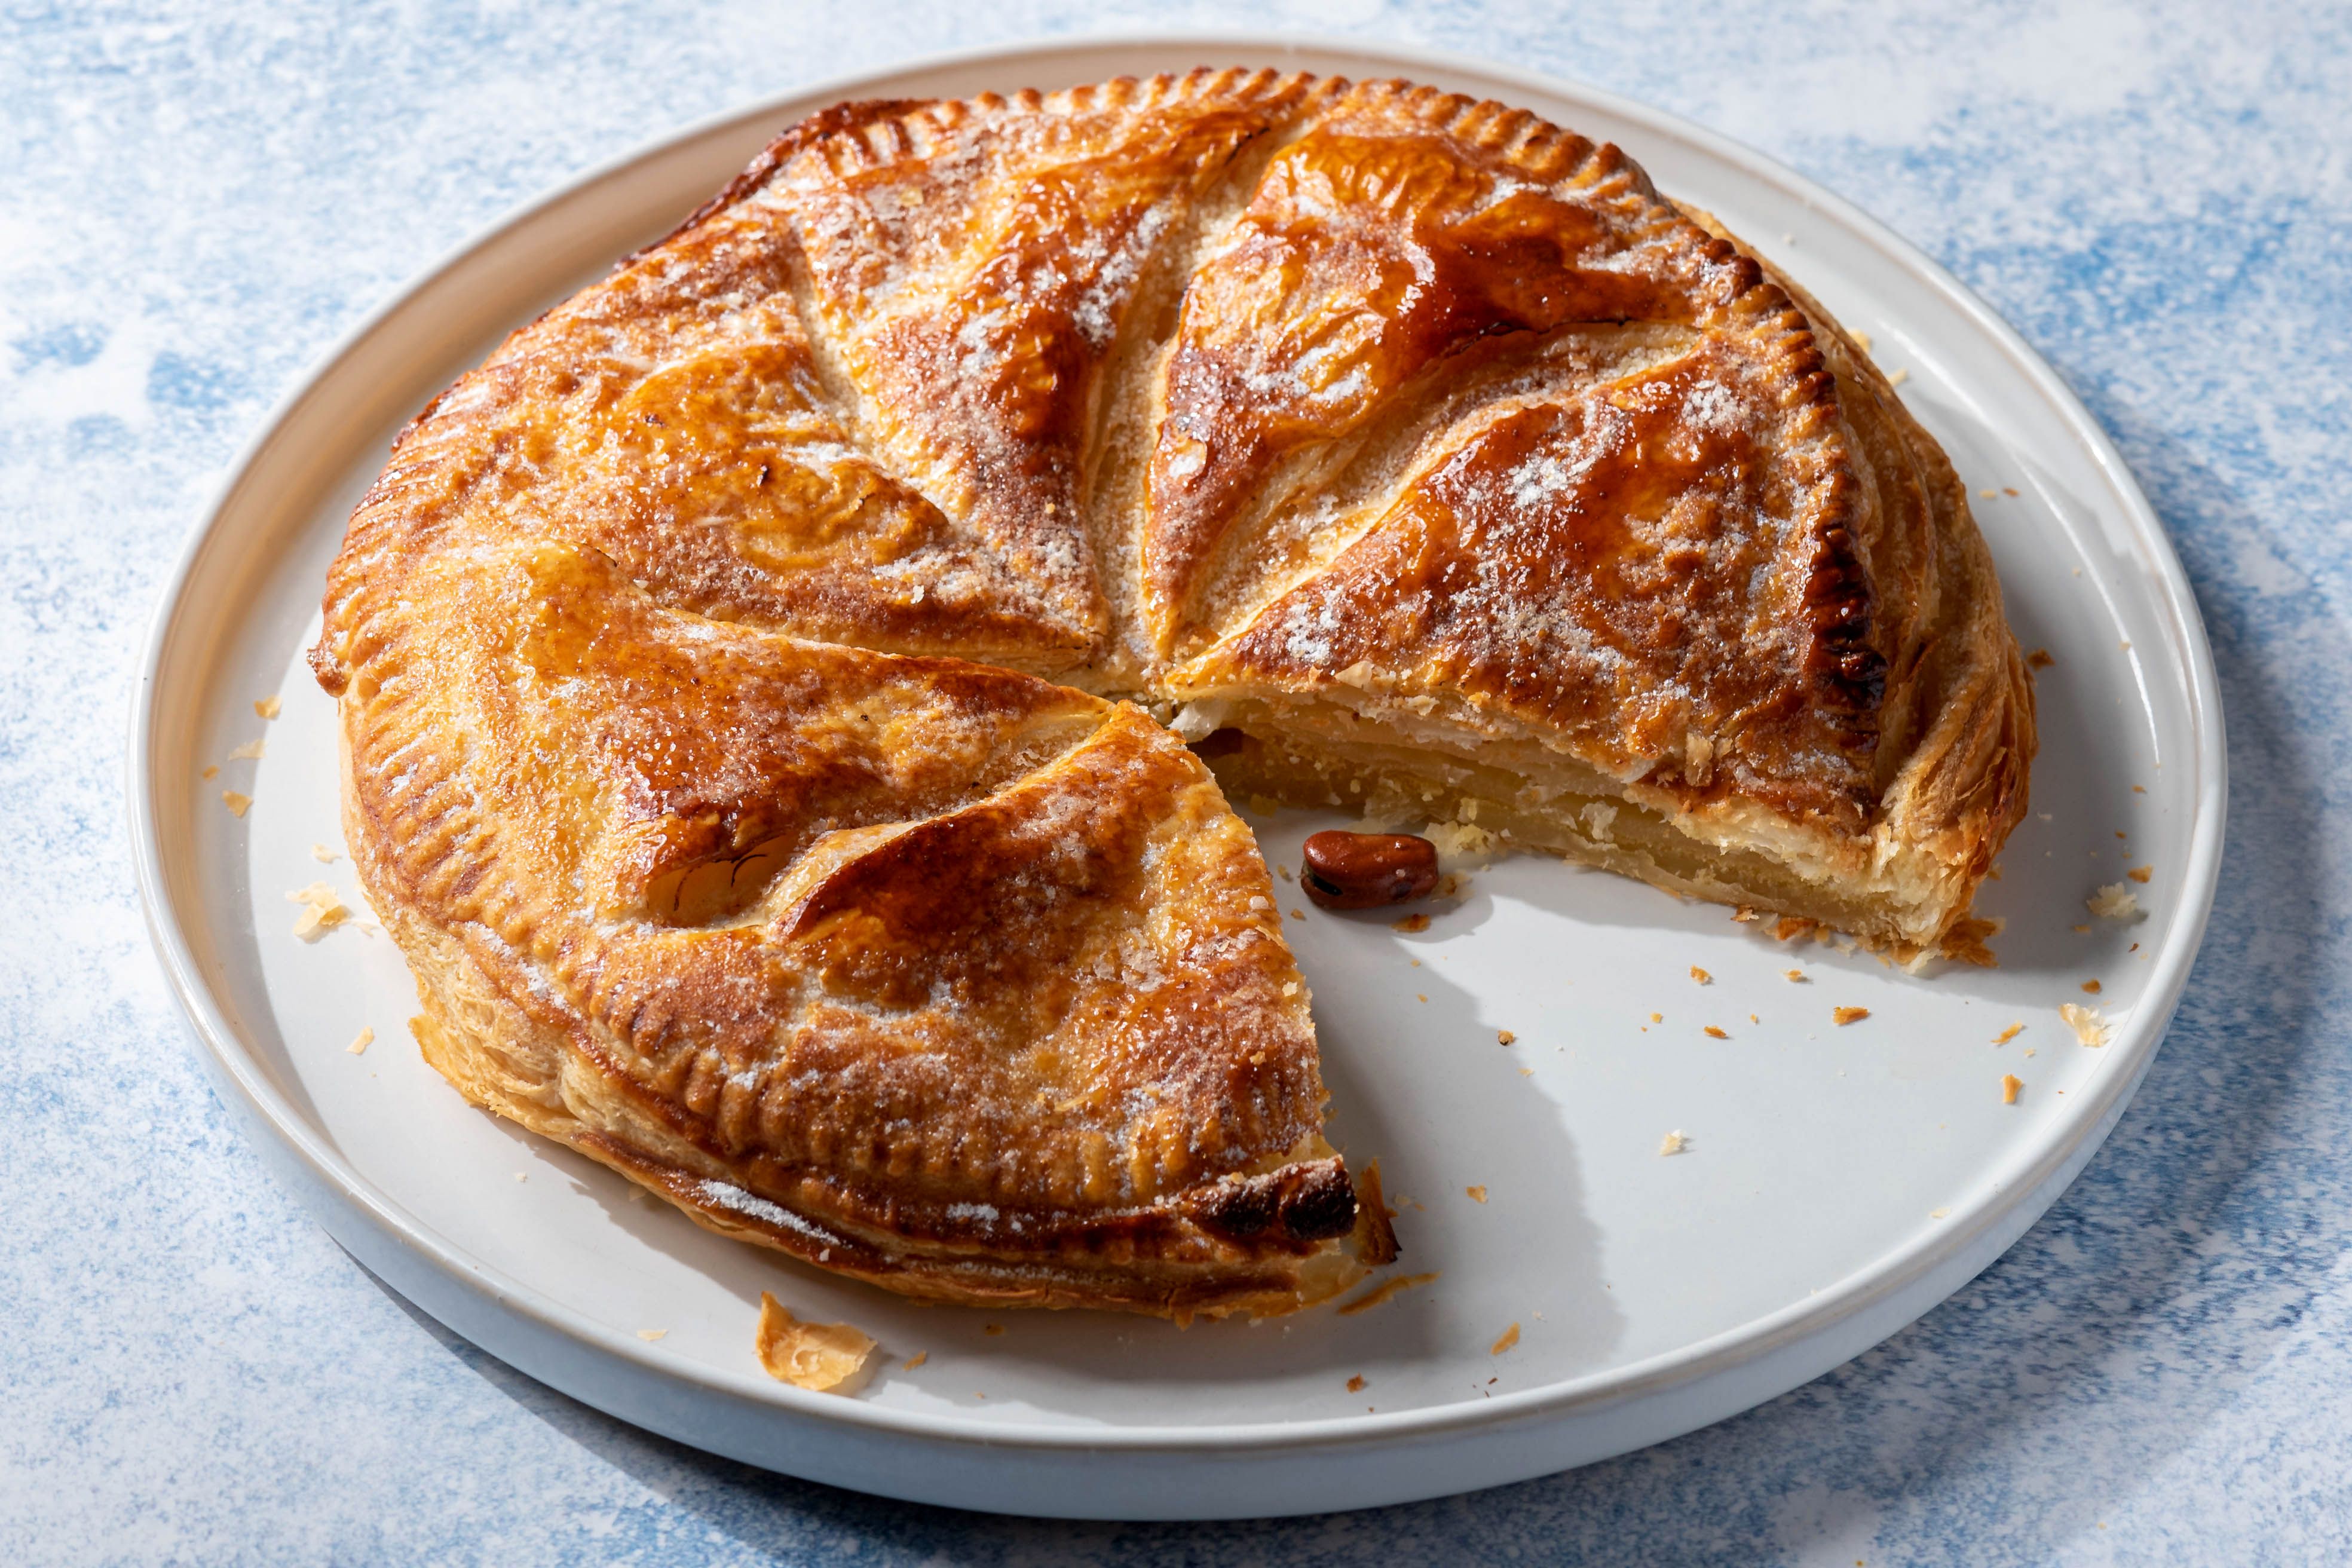 Traditional French Galette des Rois